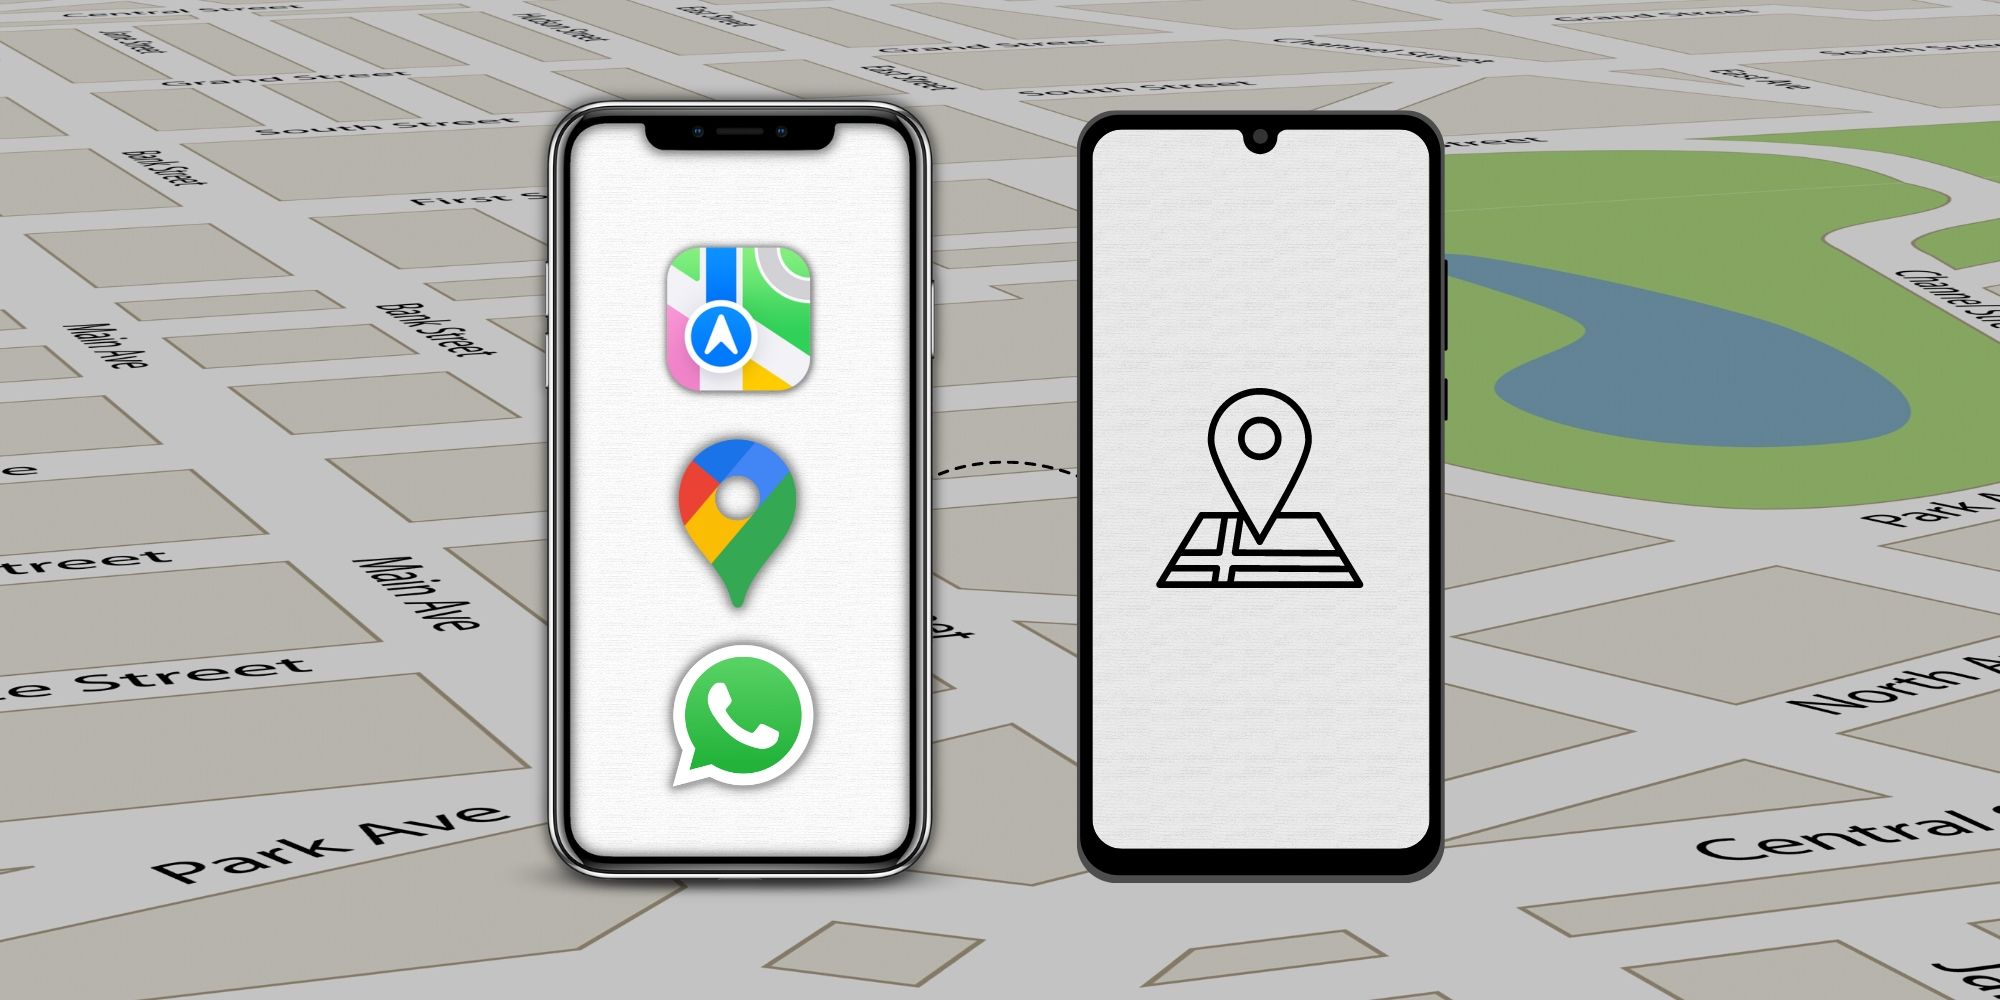 iPhone and Android phone over a map background